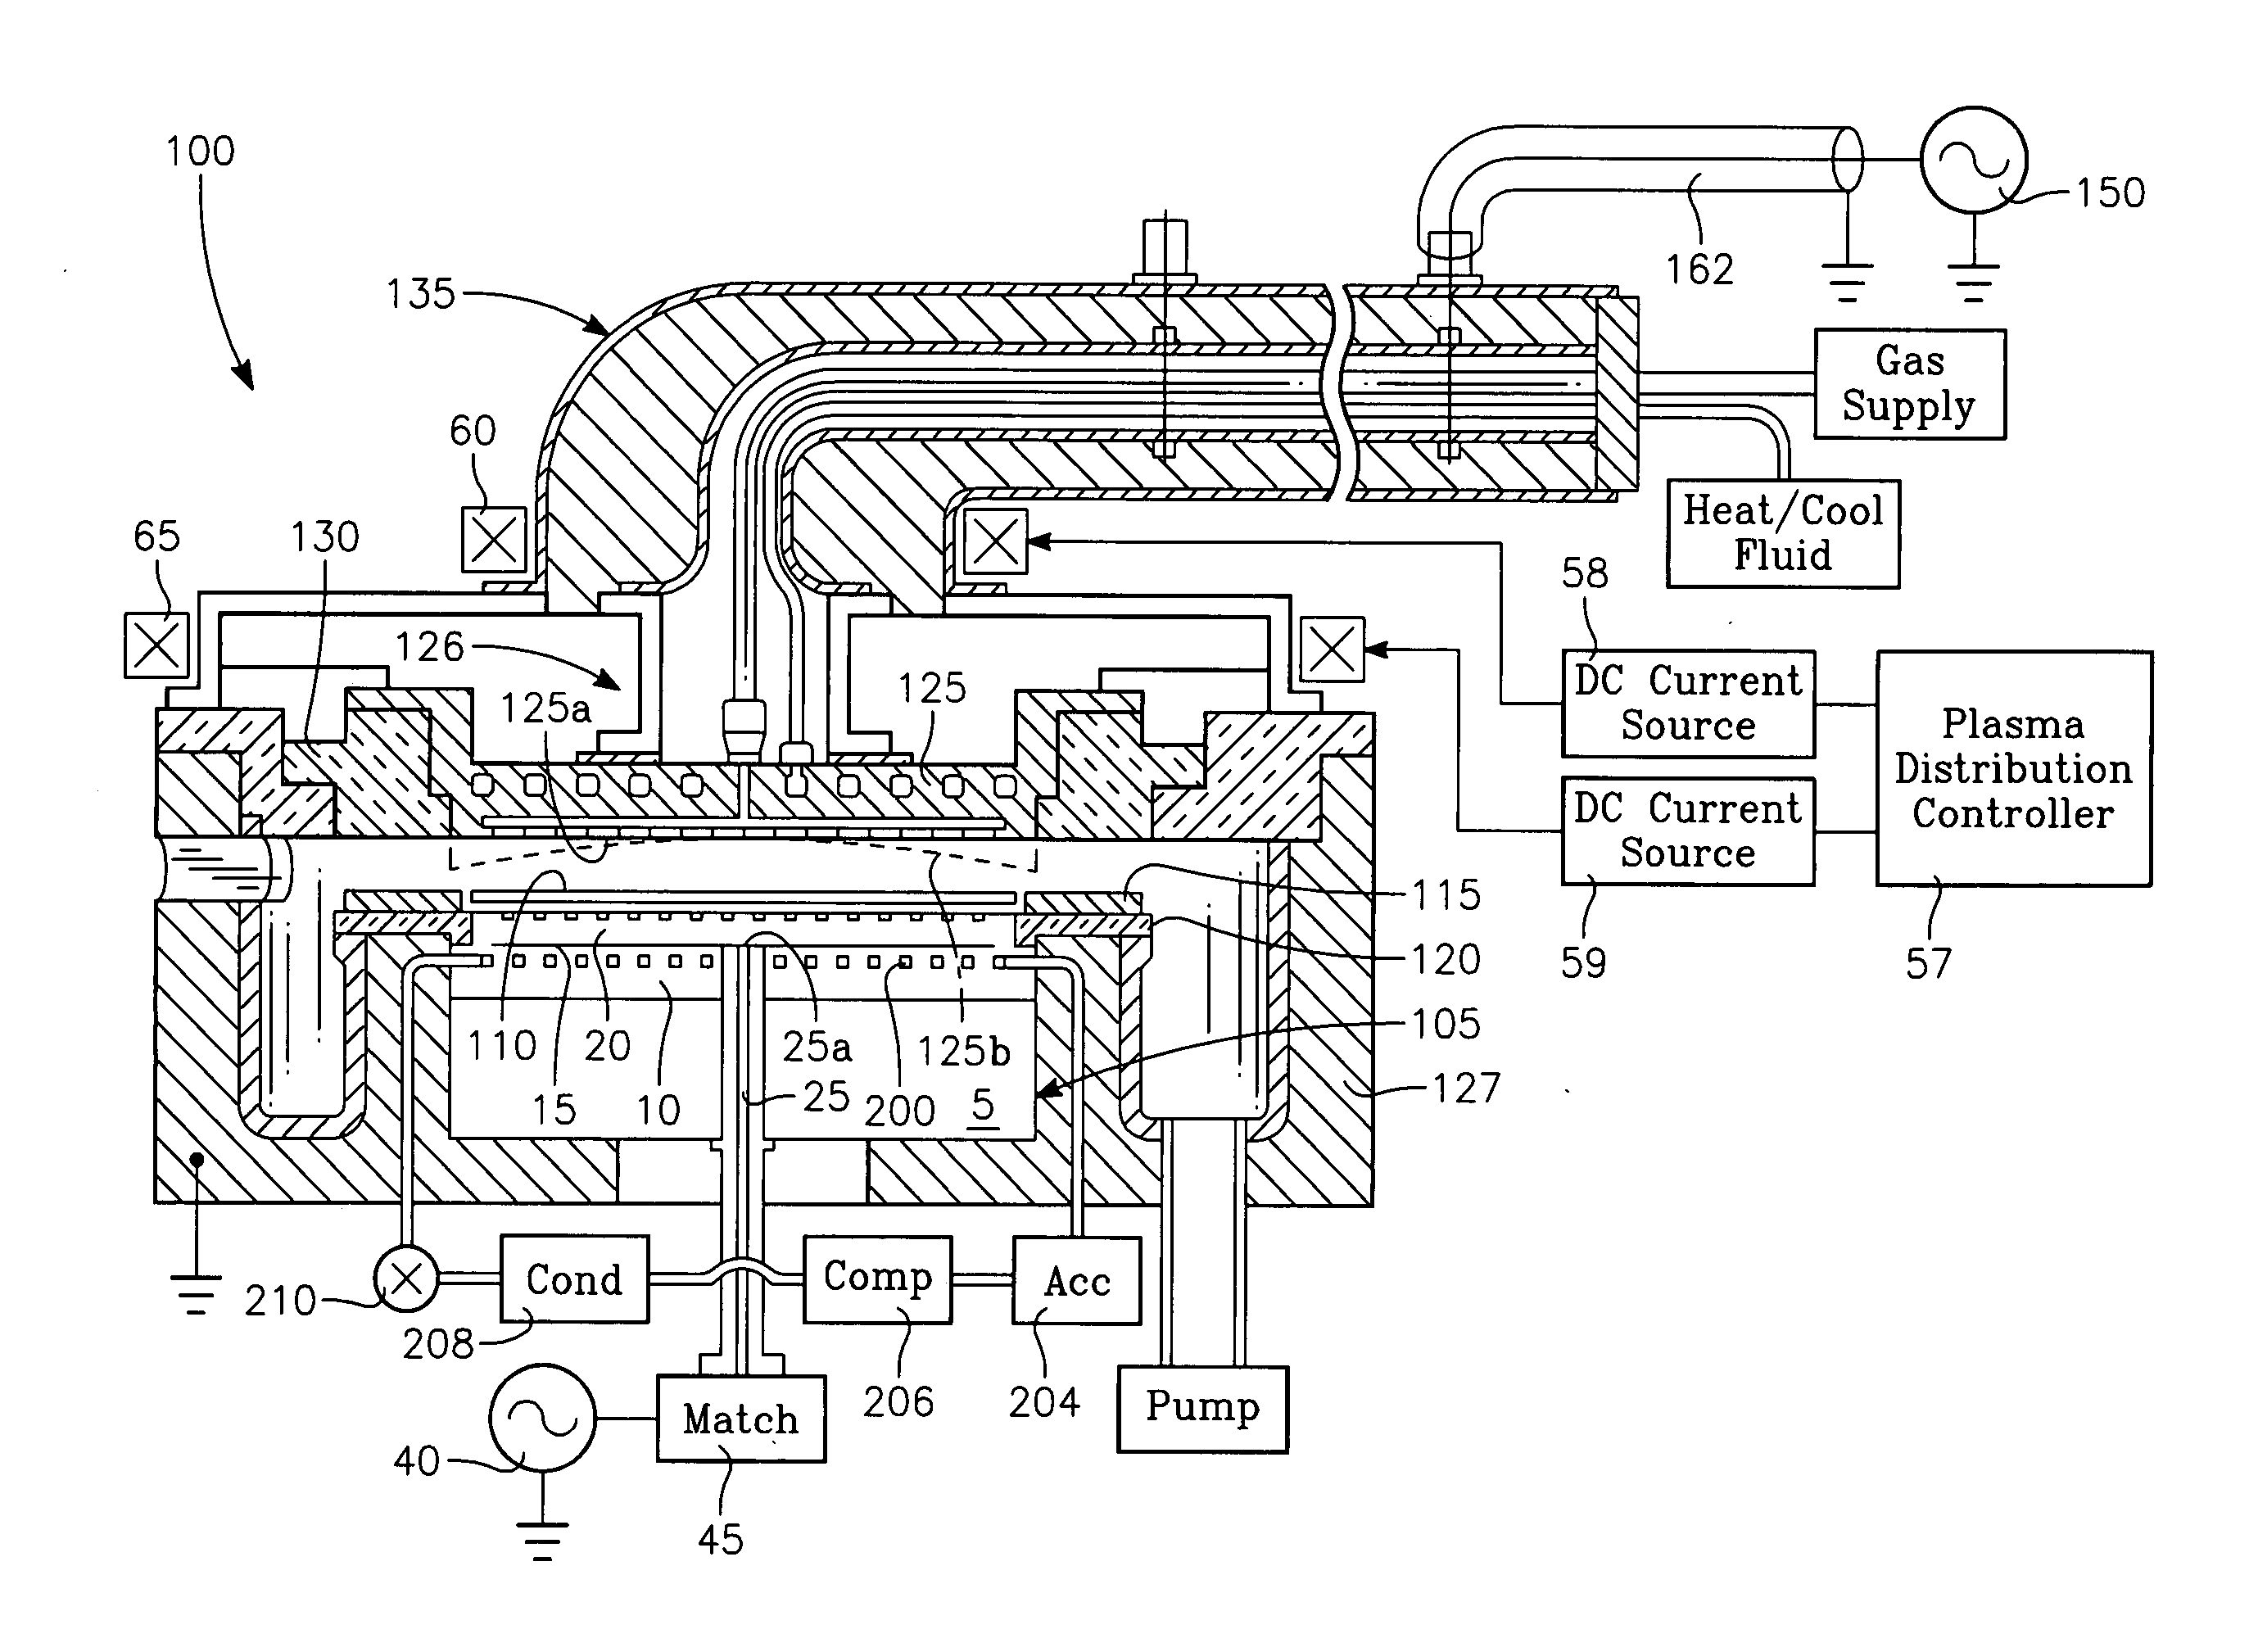 Plasma reactor with wafer backside thermal loop, two-phase internal pedestal thermal loop and a control processor governing both loops